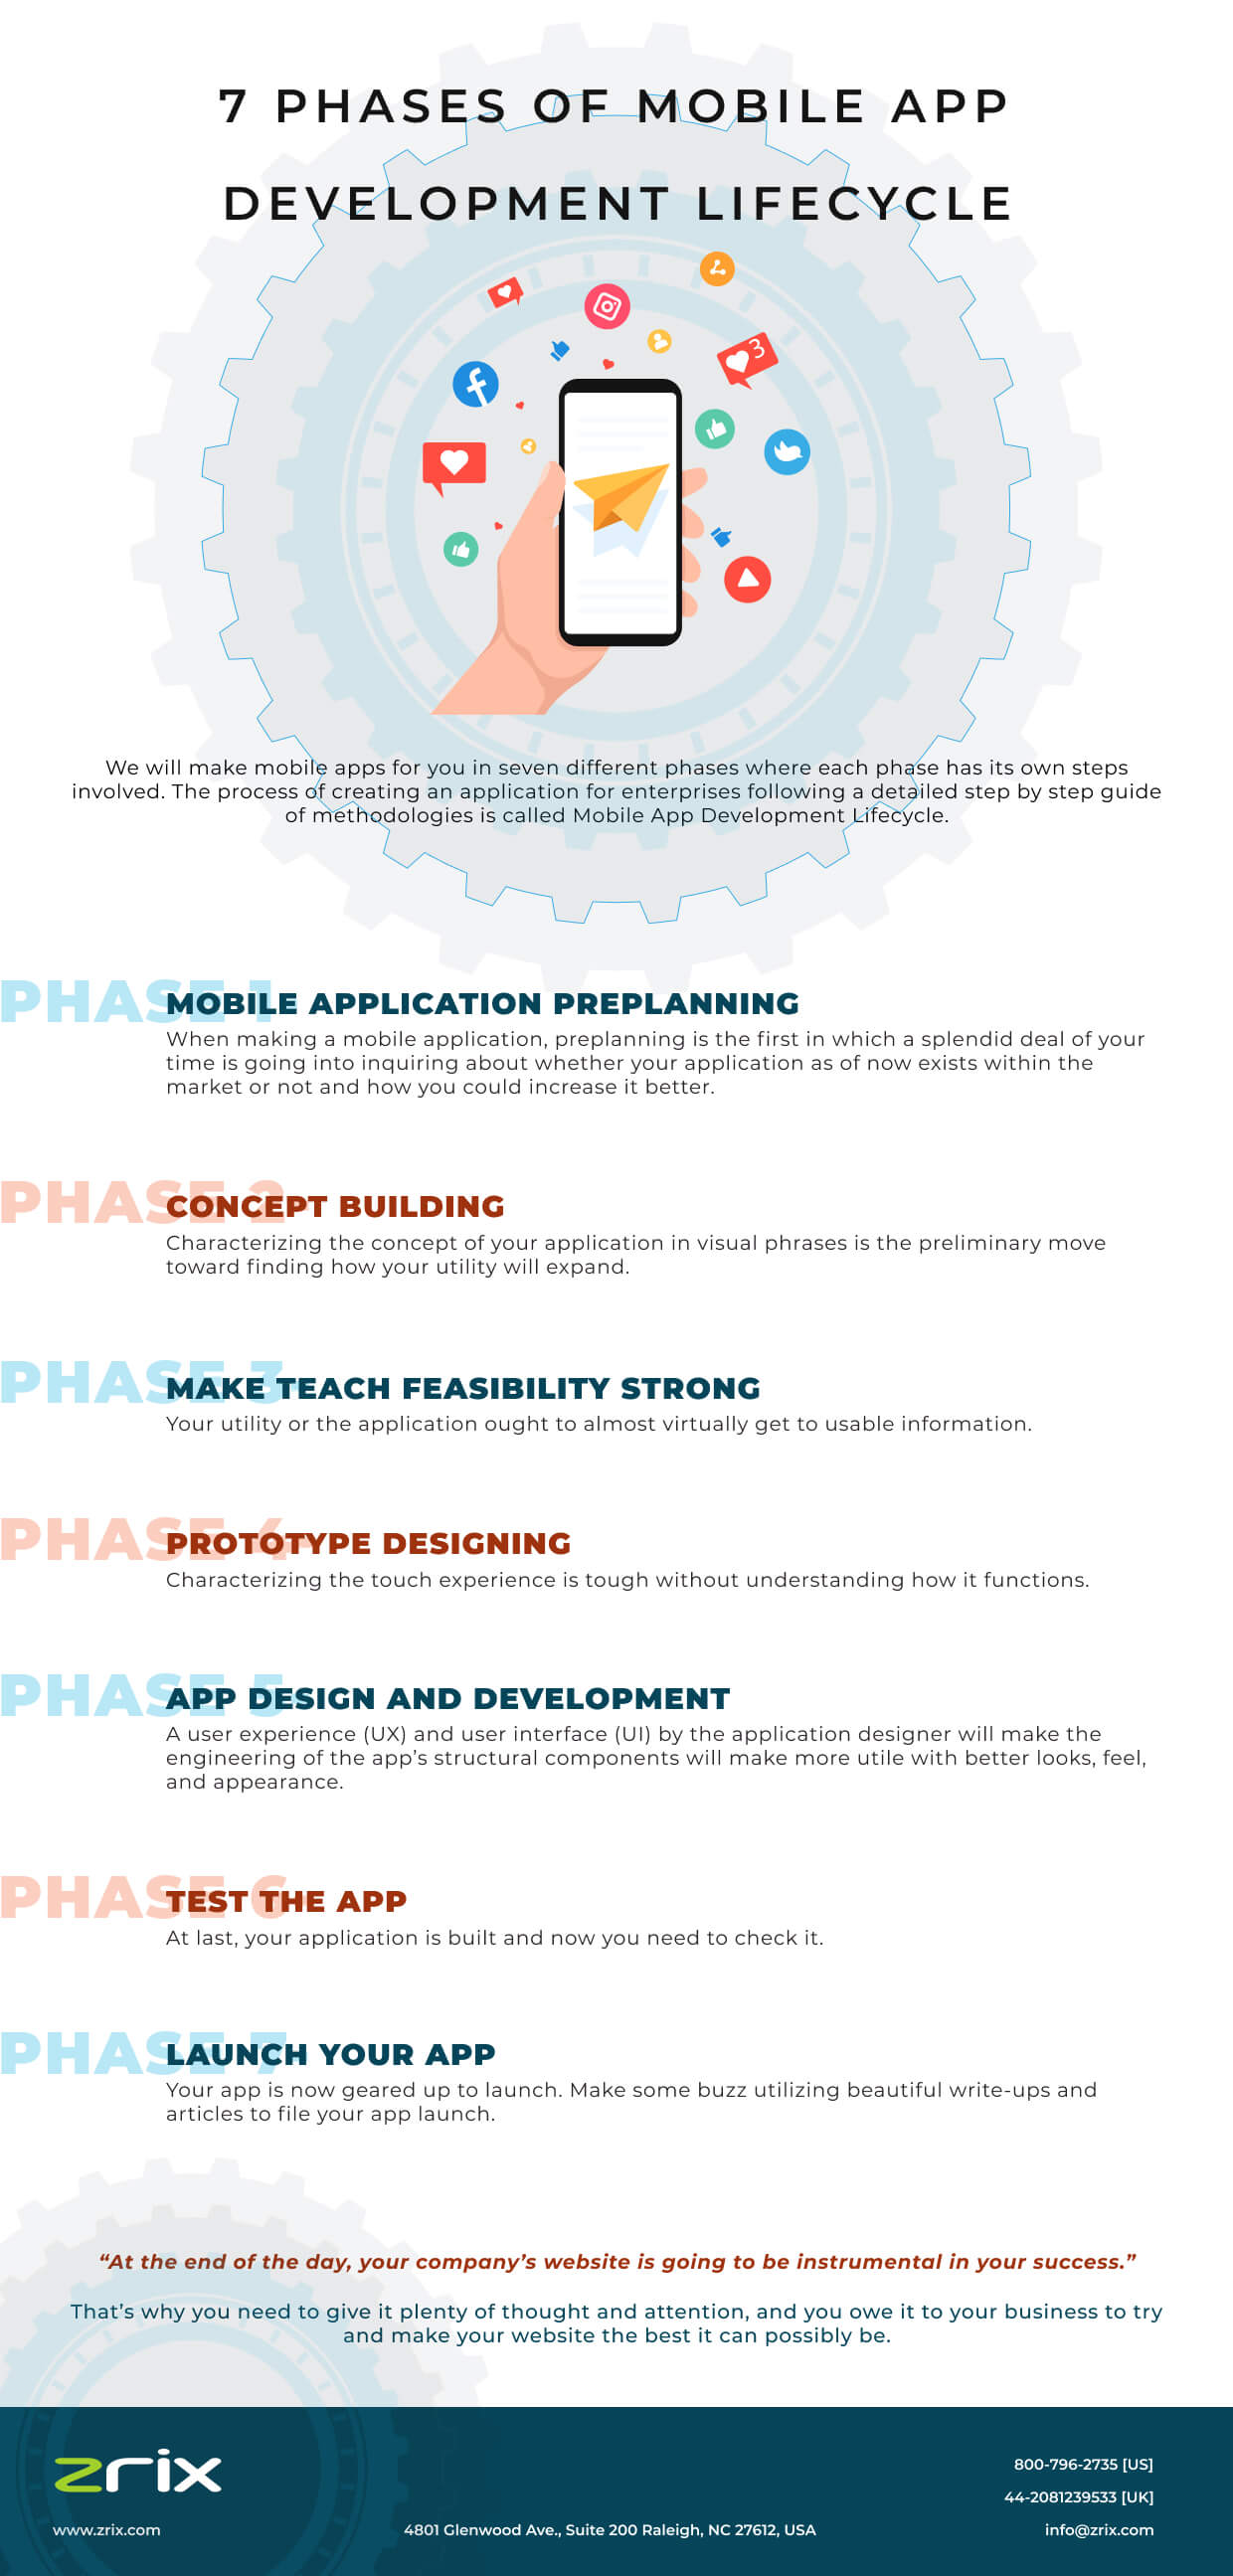 7 phases of mobile app development lifecycle